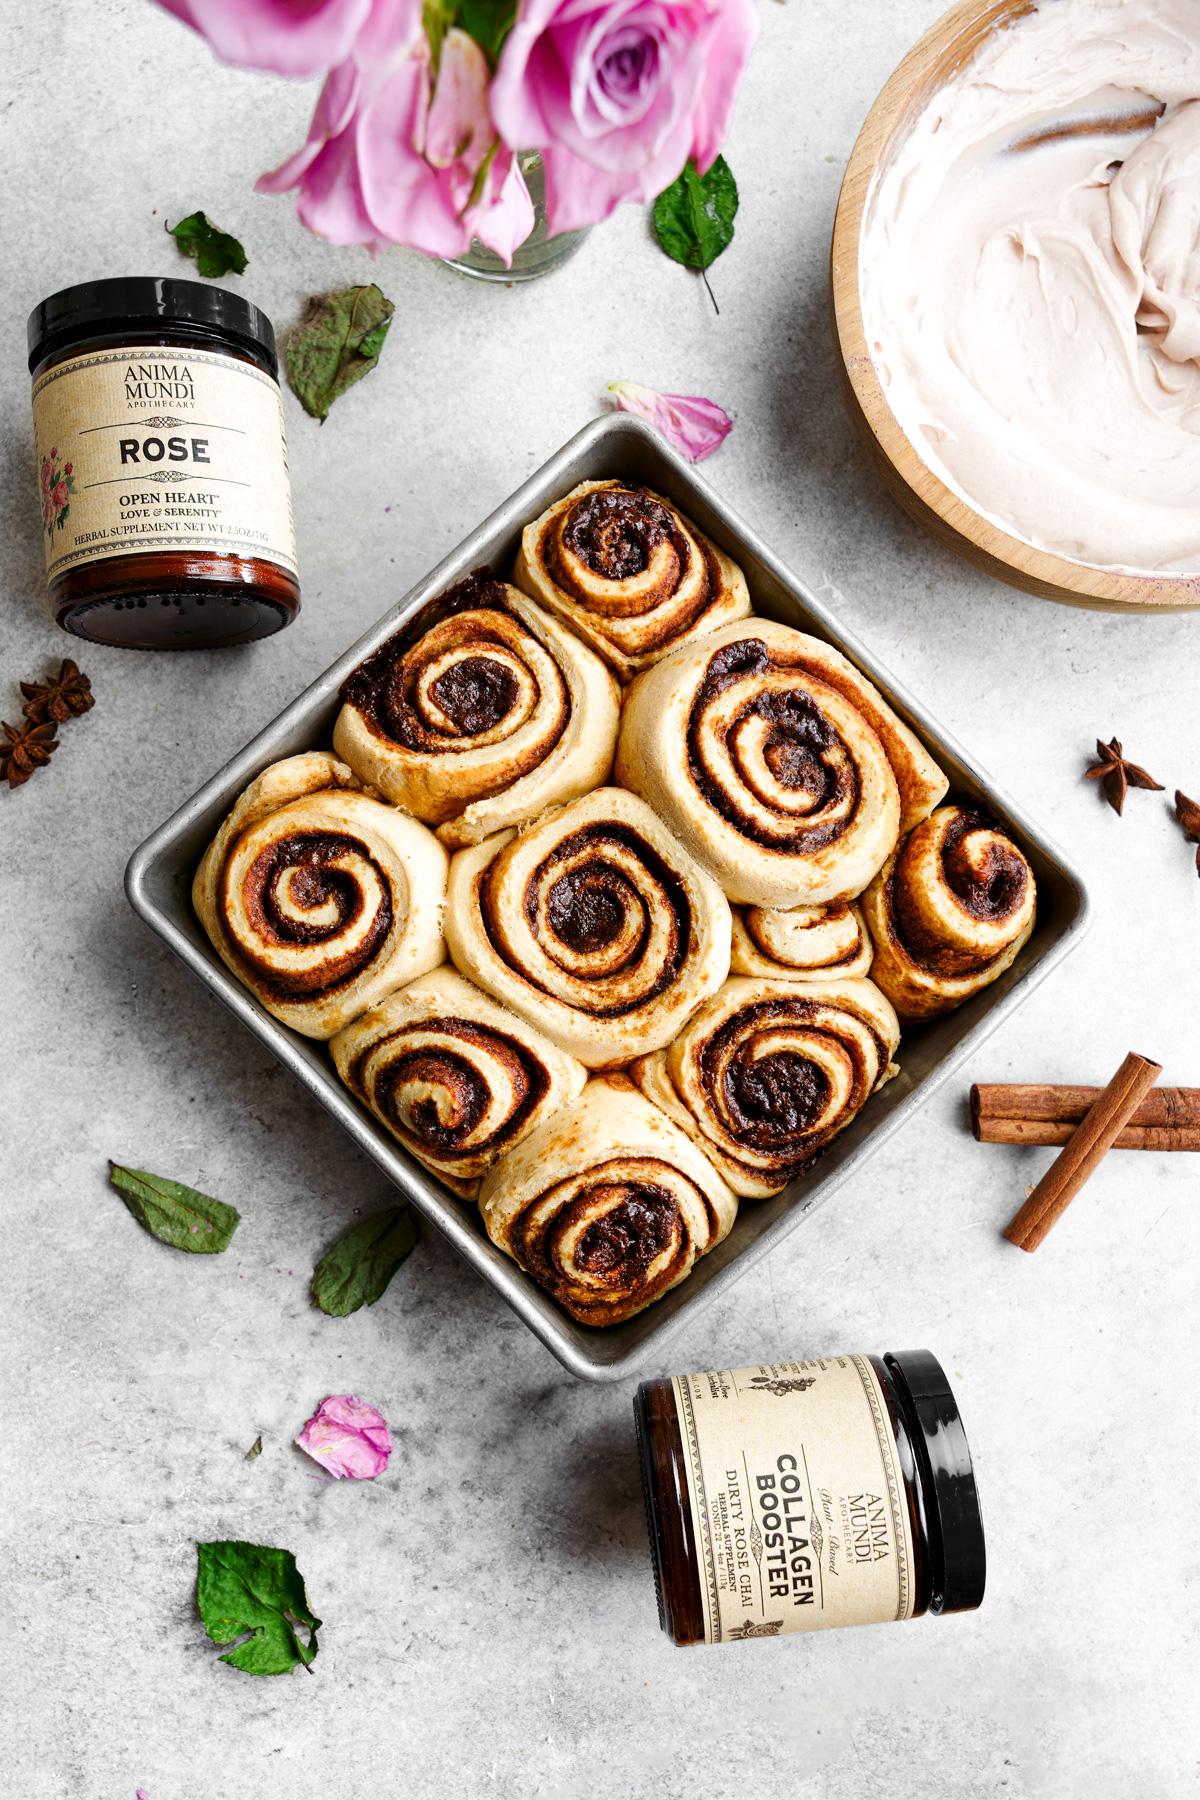 the chai cinnamon rolls in a baking dish without any frosting on top and with the anima mundi products